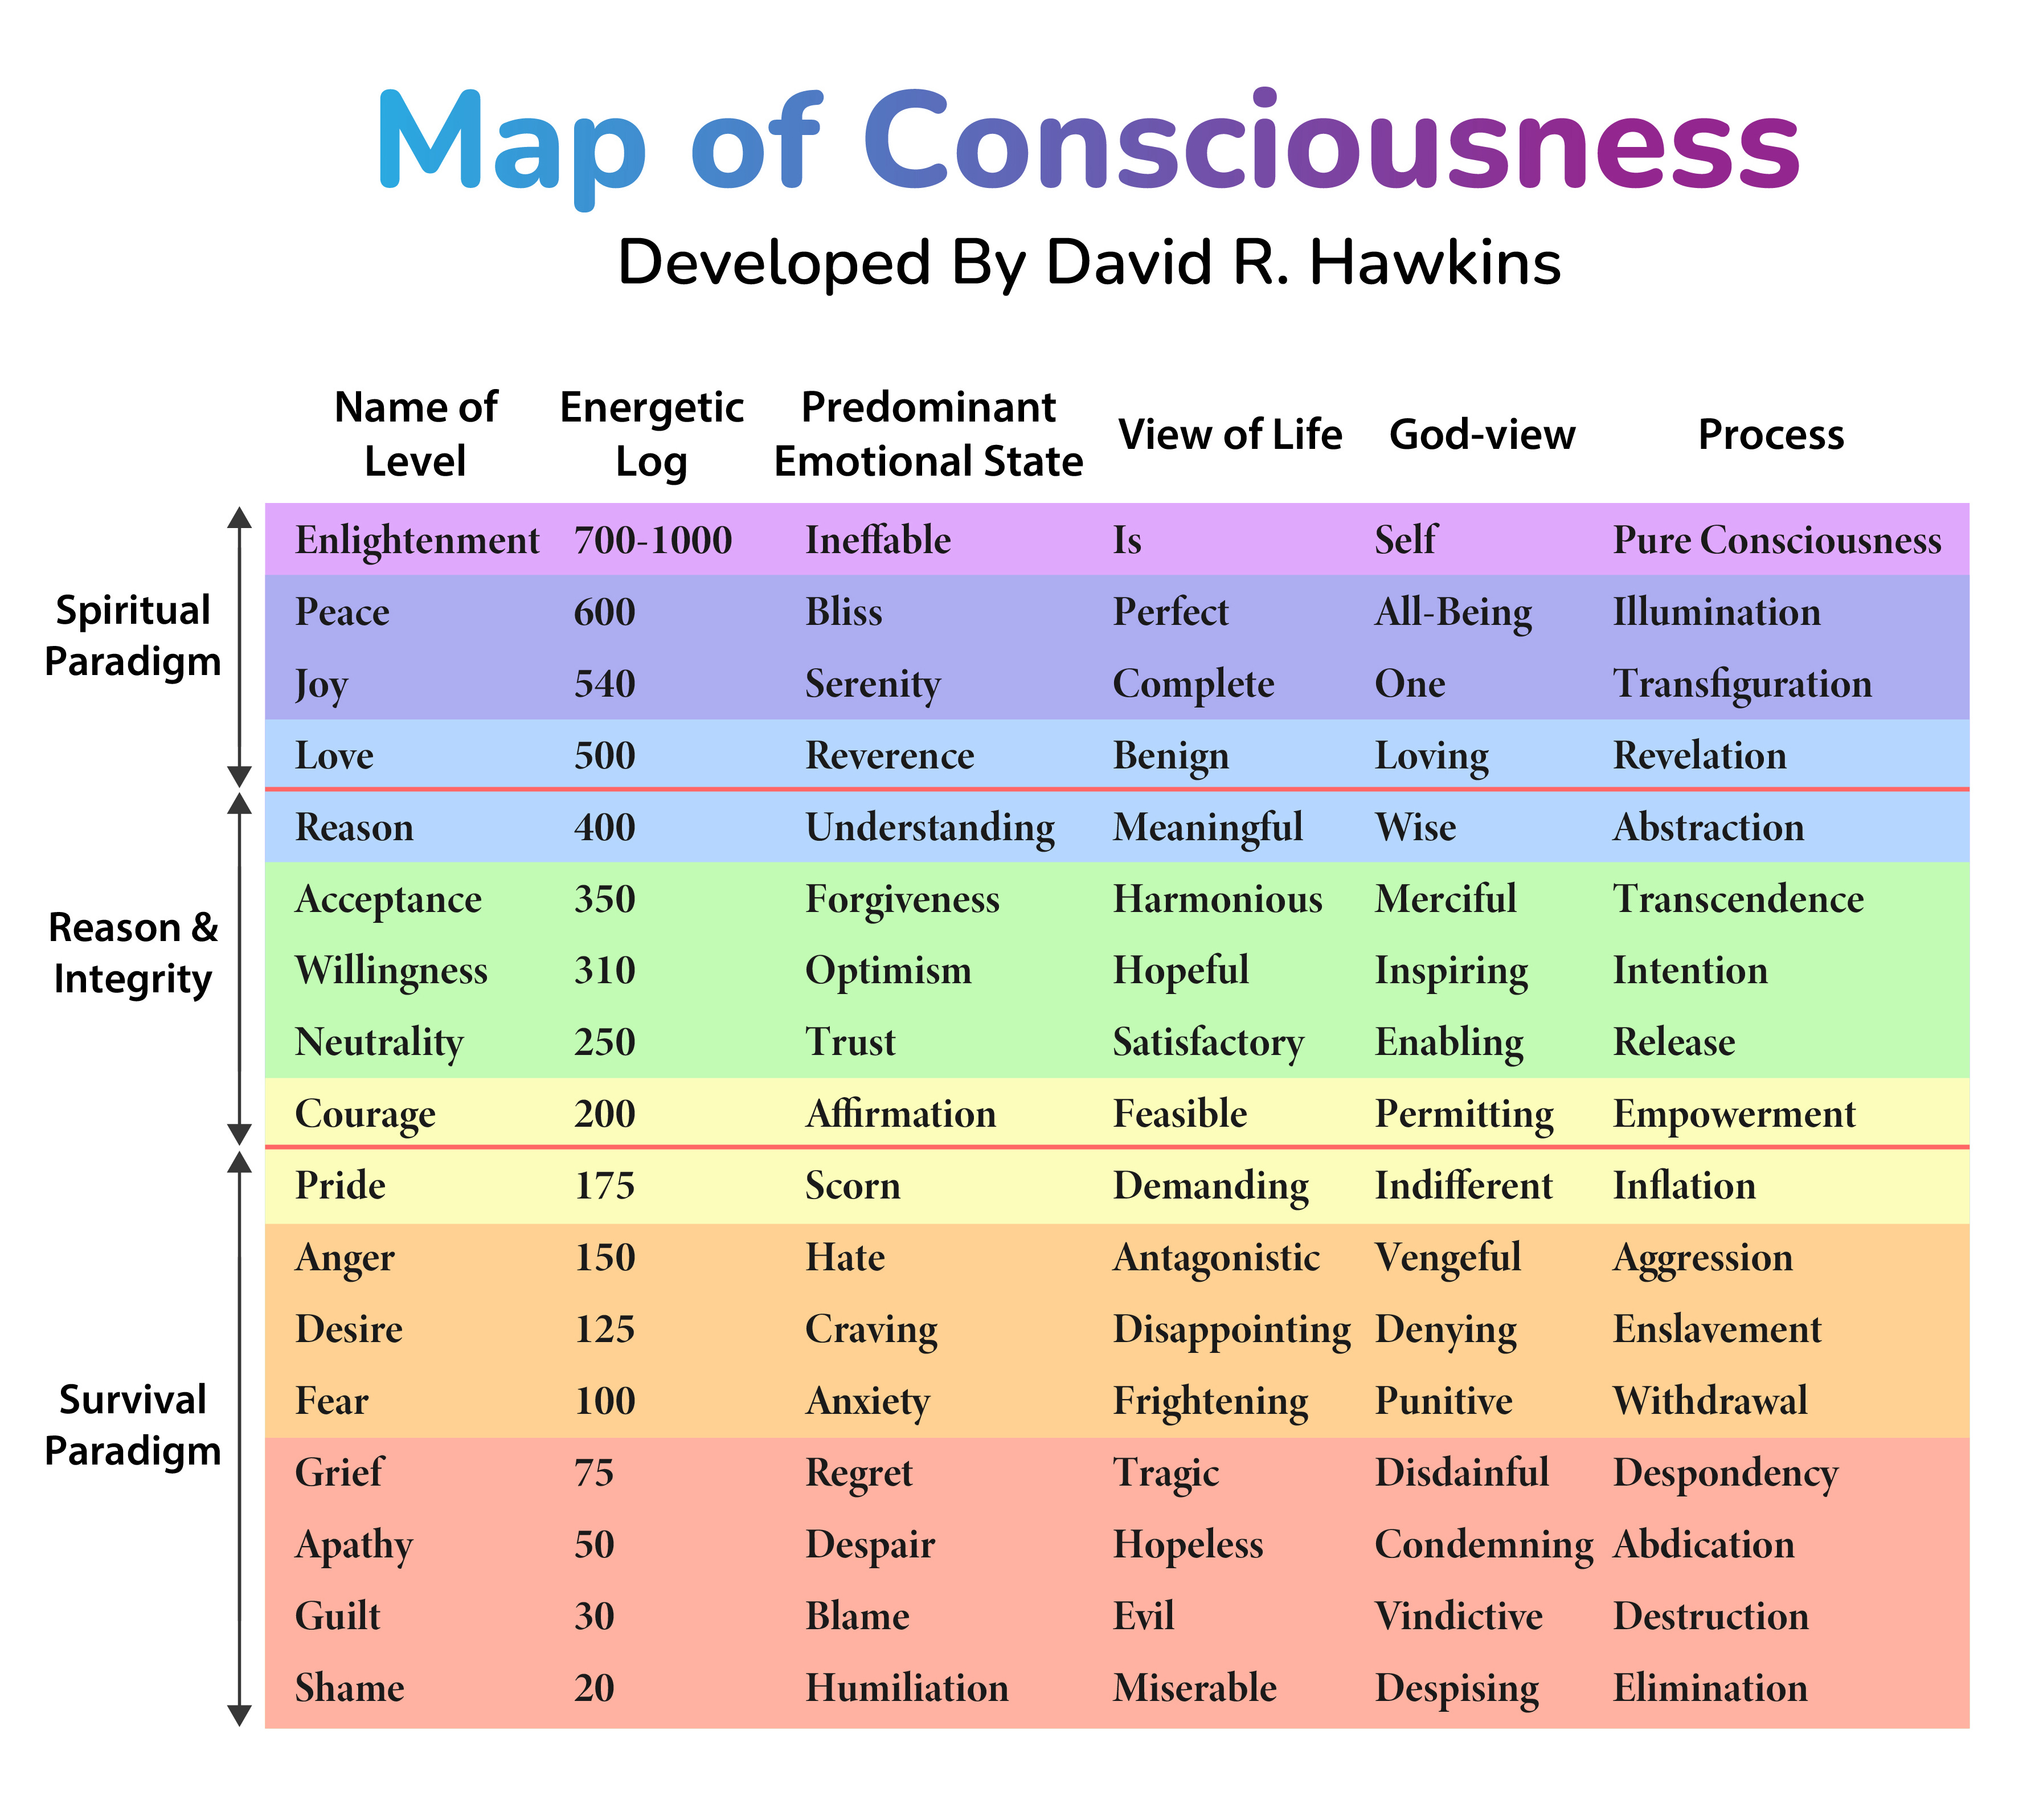 How to Measure Consciousness With the Map of Consciousness